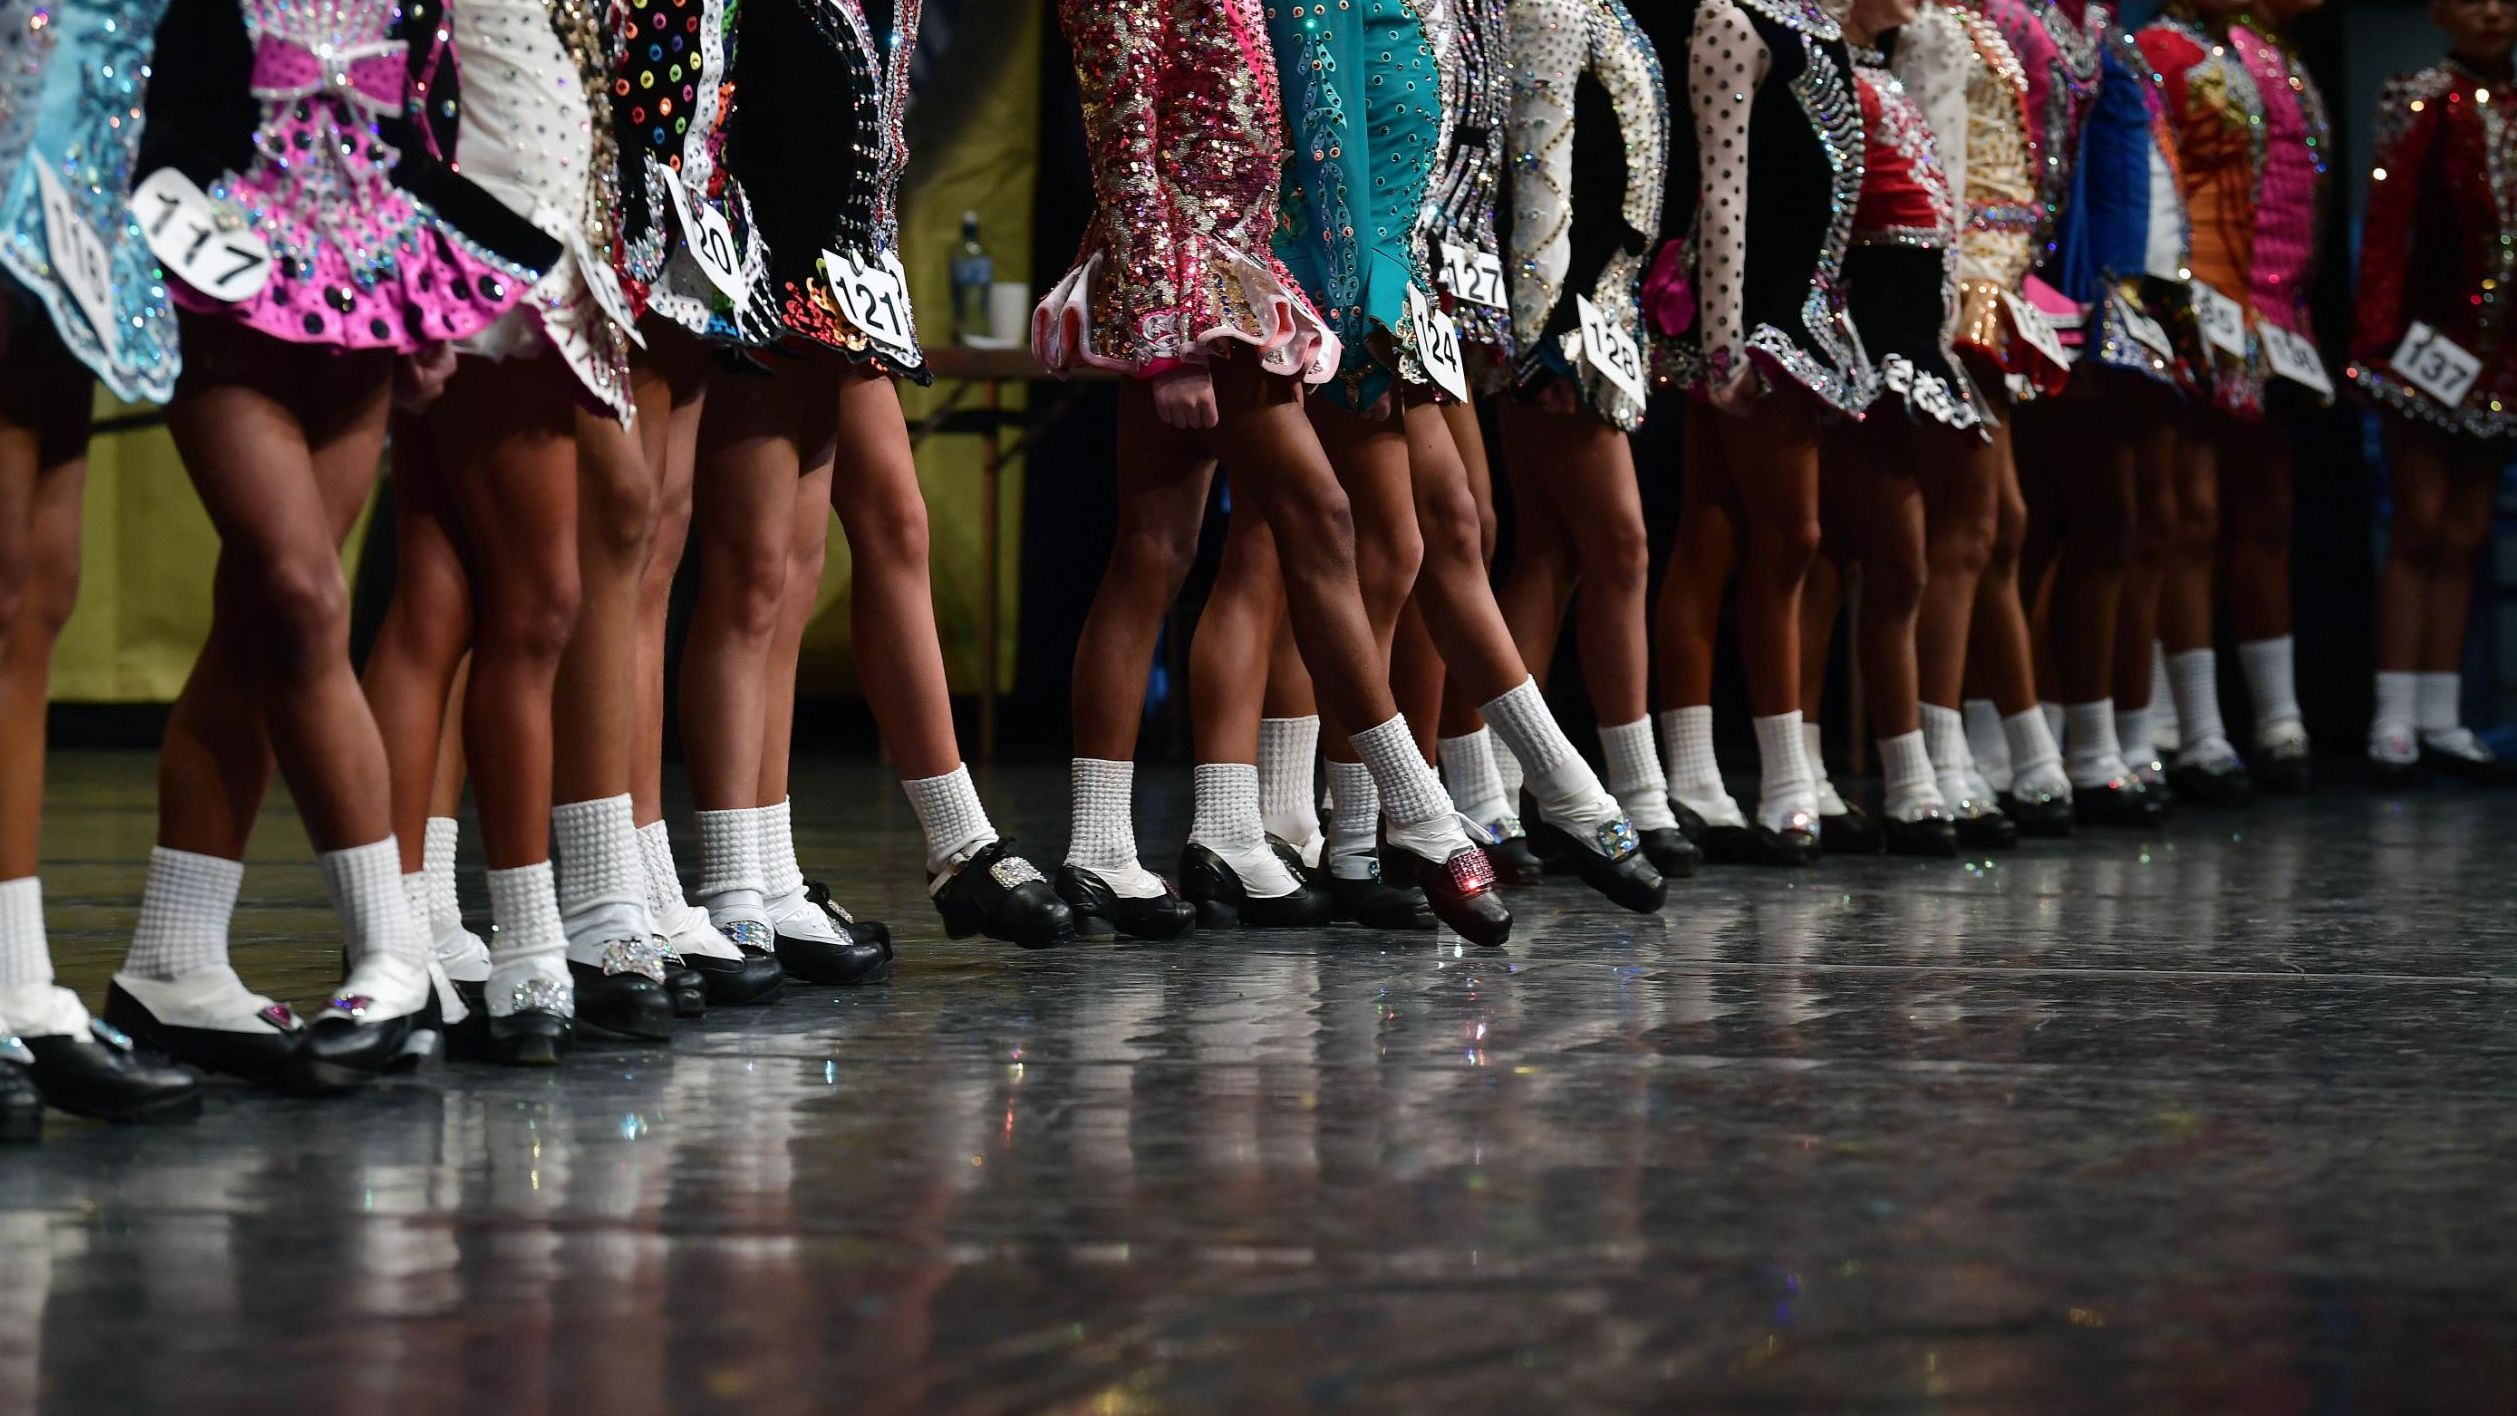 Opening day of the World Irish Dancing Championships on April 10, 2022 in Belfast, Northern Ireland, one of the competitions organized by the Irish Dancing Commission (CLRG).